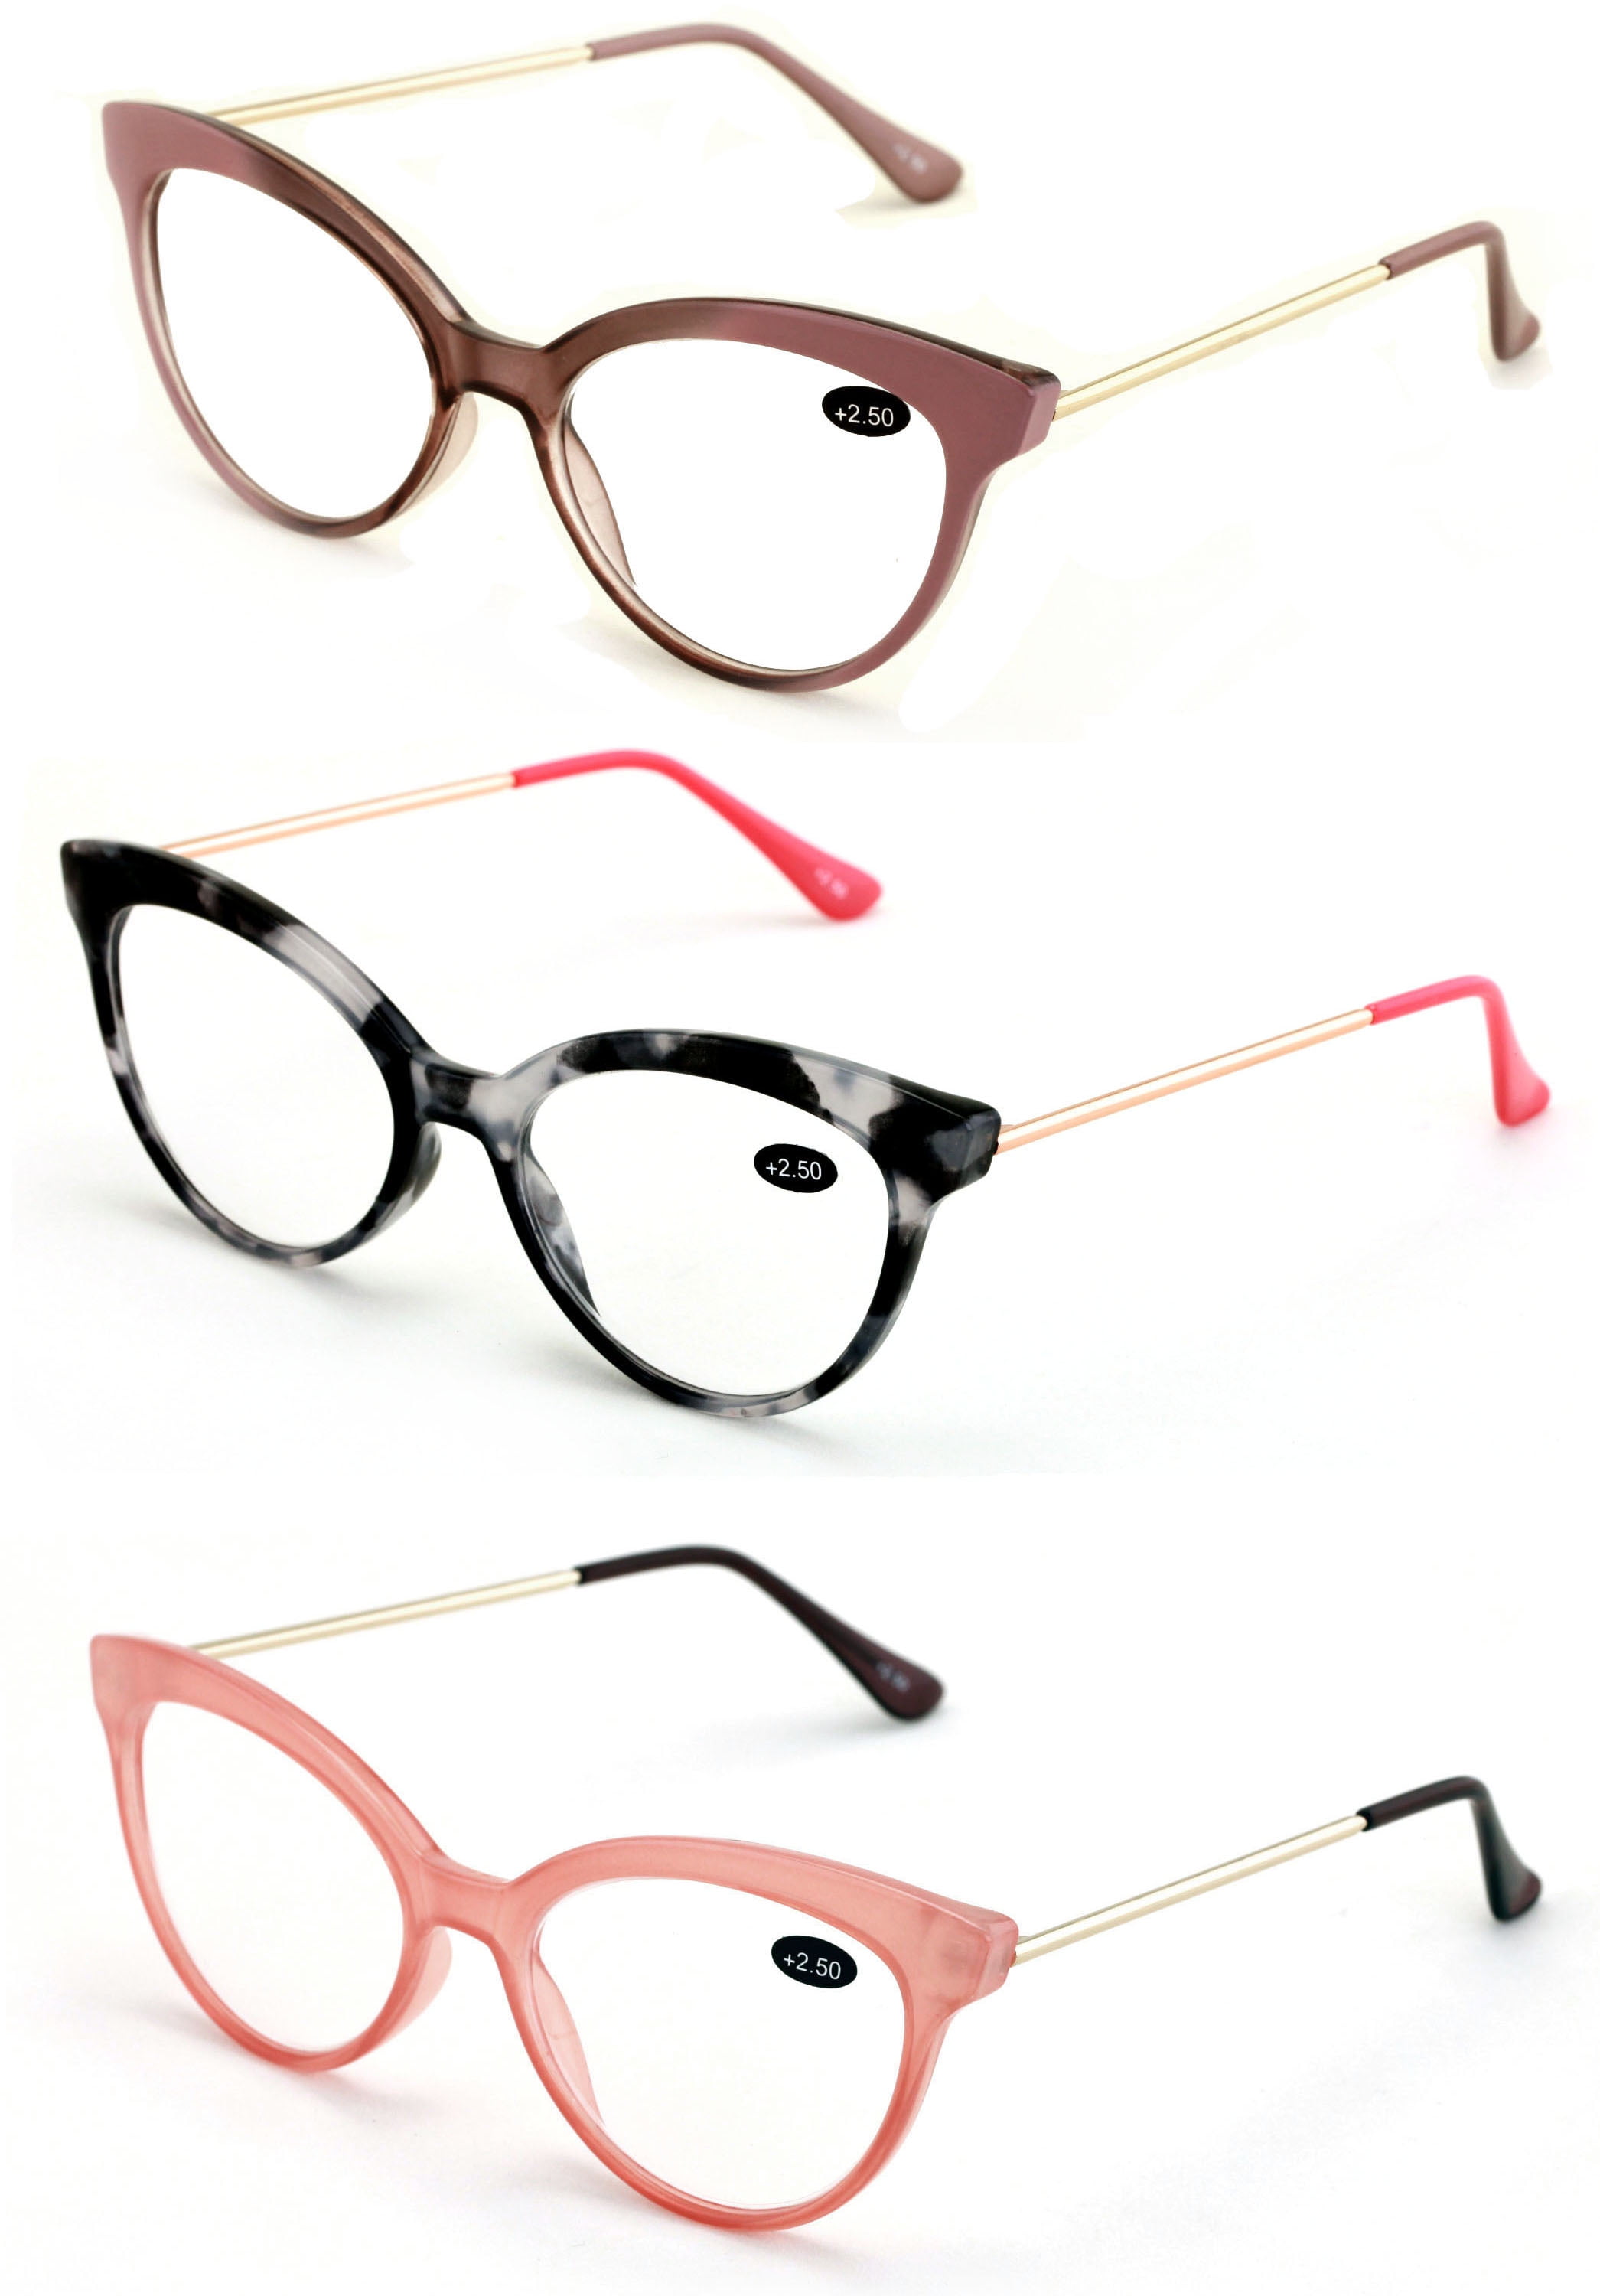 3 Pairs Women Cateye Pointed Tip Reading Glasses Metal Temple Cat Eye